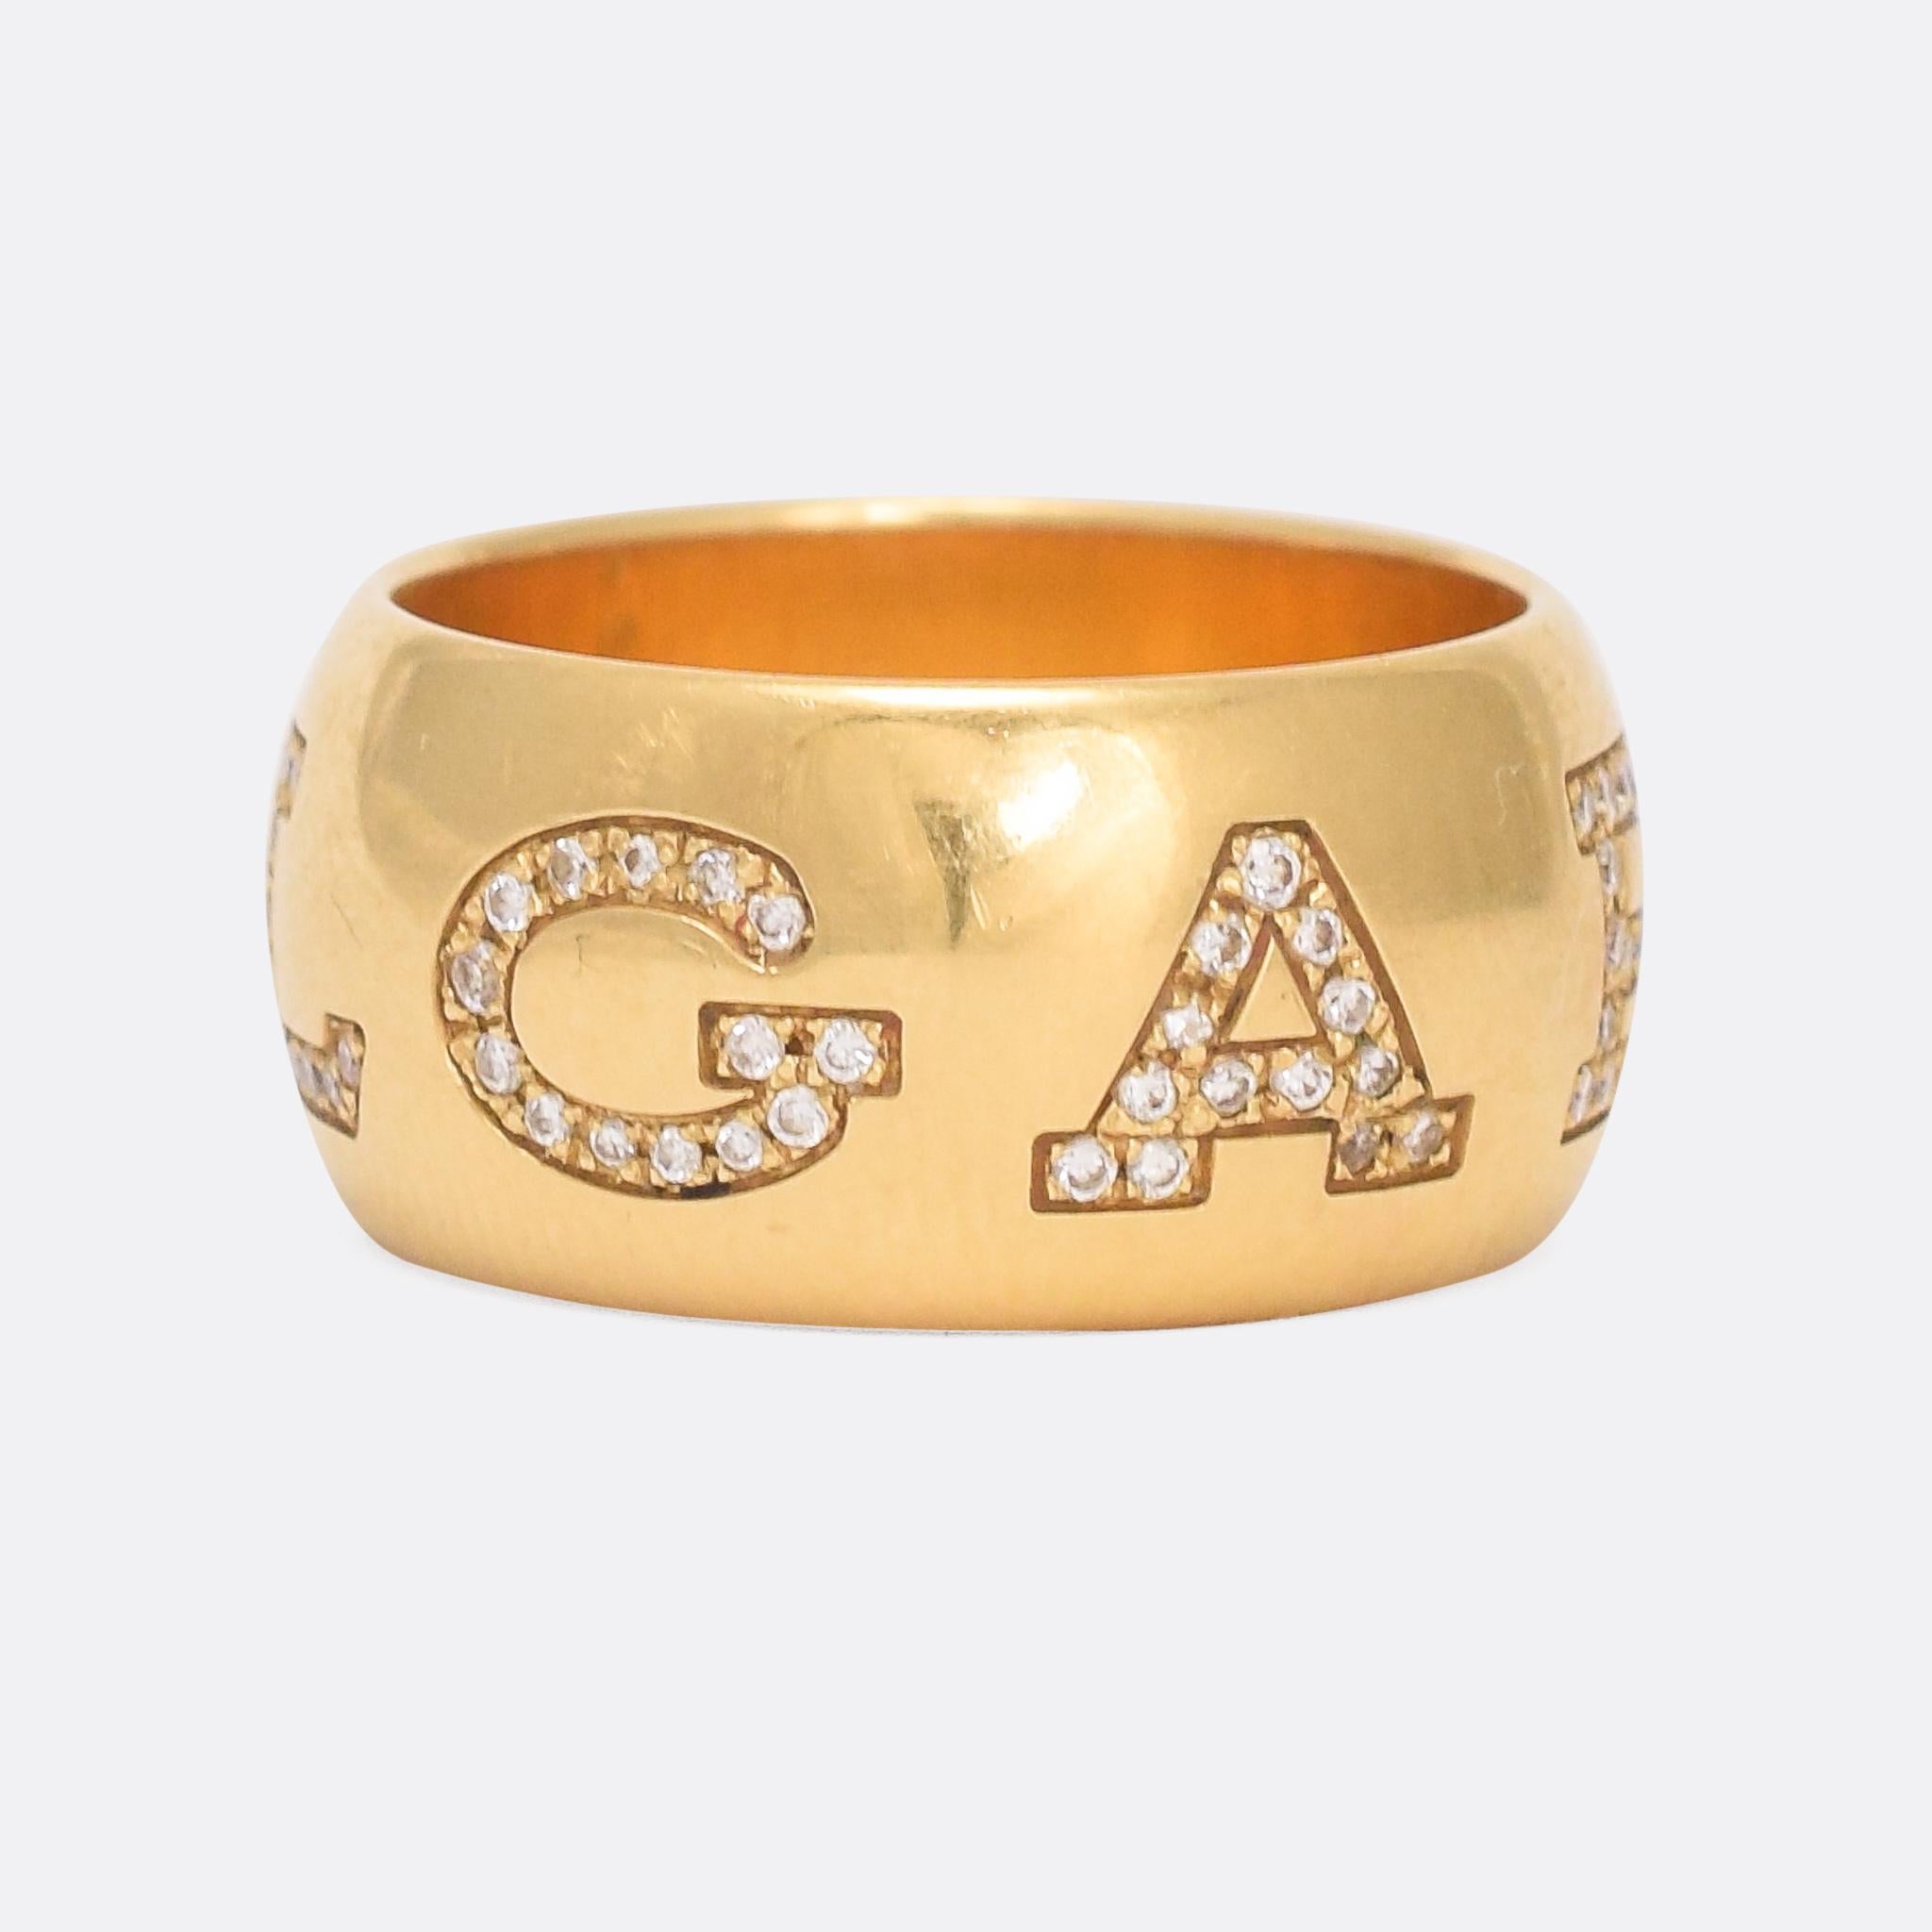 Vintage BULGARI ring dating from the 1980s. The iconic lettering (stylized with V in place of U, like the Romans did) wraps around the band; each letter studded with white diamonds. It's a wide band (1.0cm) and modelled in 18 karat gold, complete